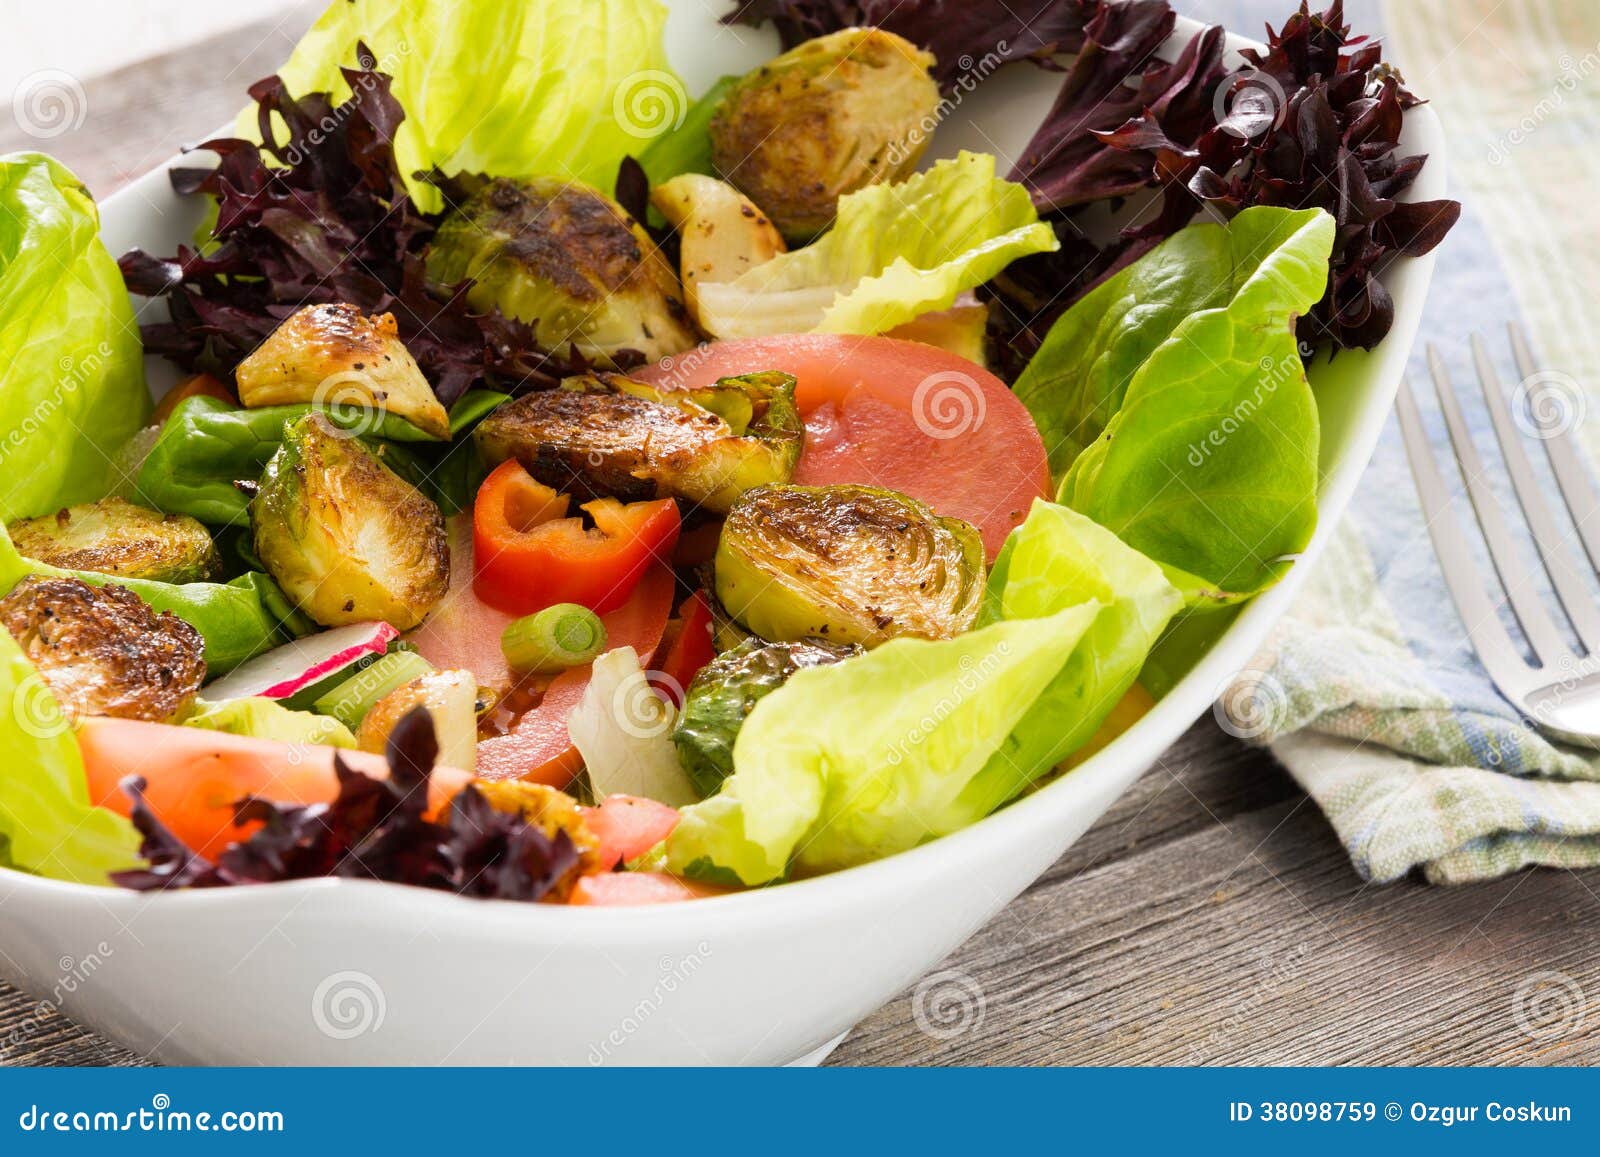 Bowl of Mixed Green Salad with Brussels Sprouts Stock Image - Image of ...